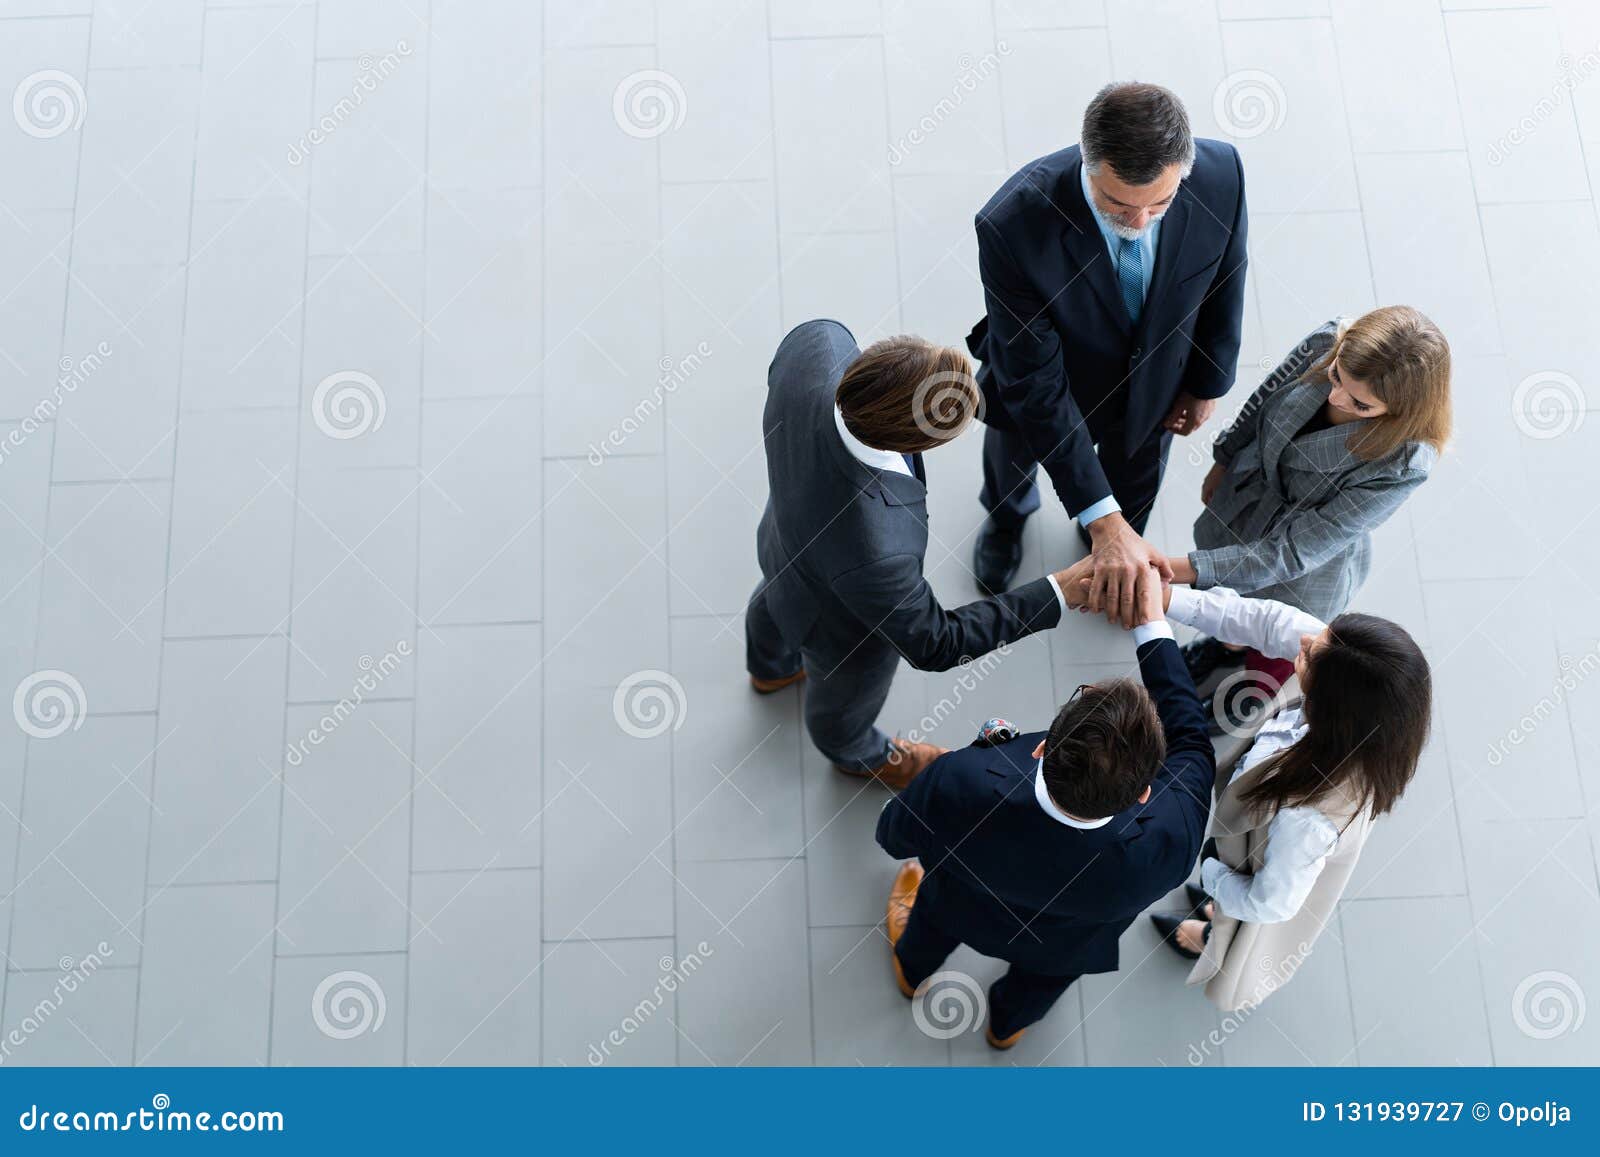 high angle view of a team of united coworkers standing with their hands together in a huddle in the modern office